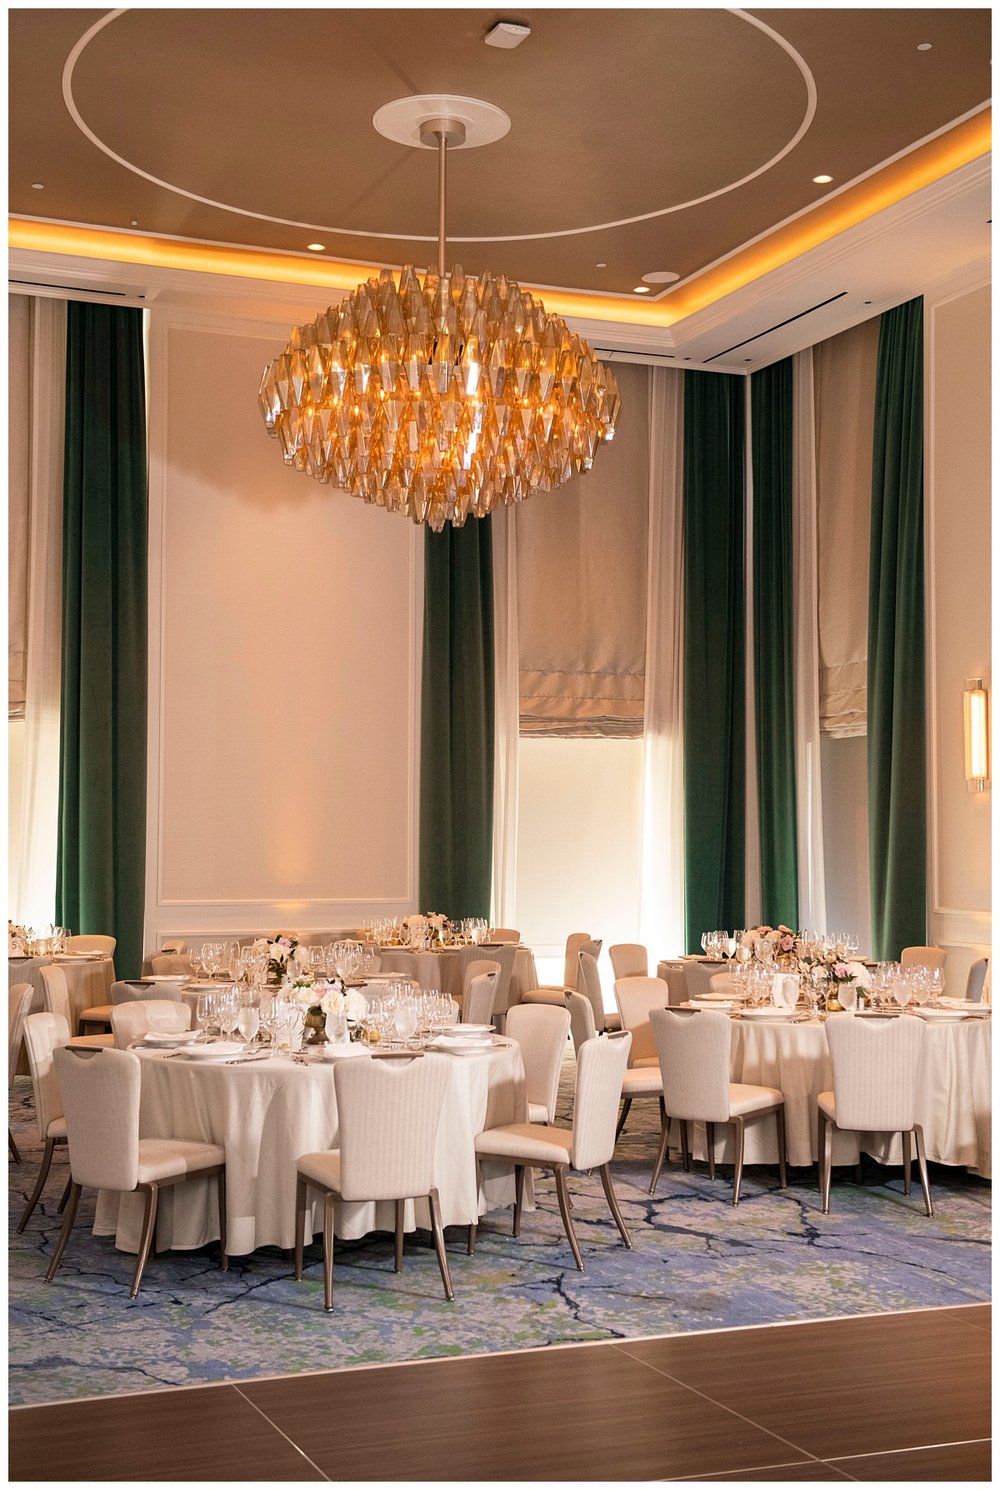 Newbury Hotel wedding reception space with white table linens